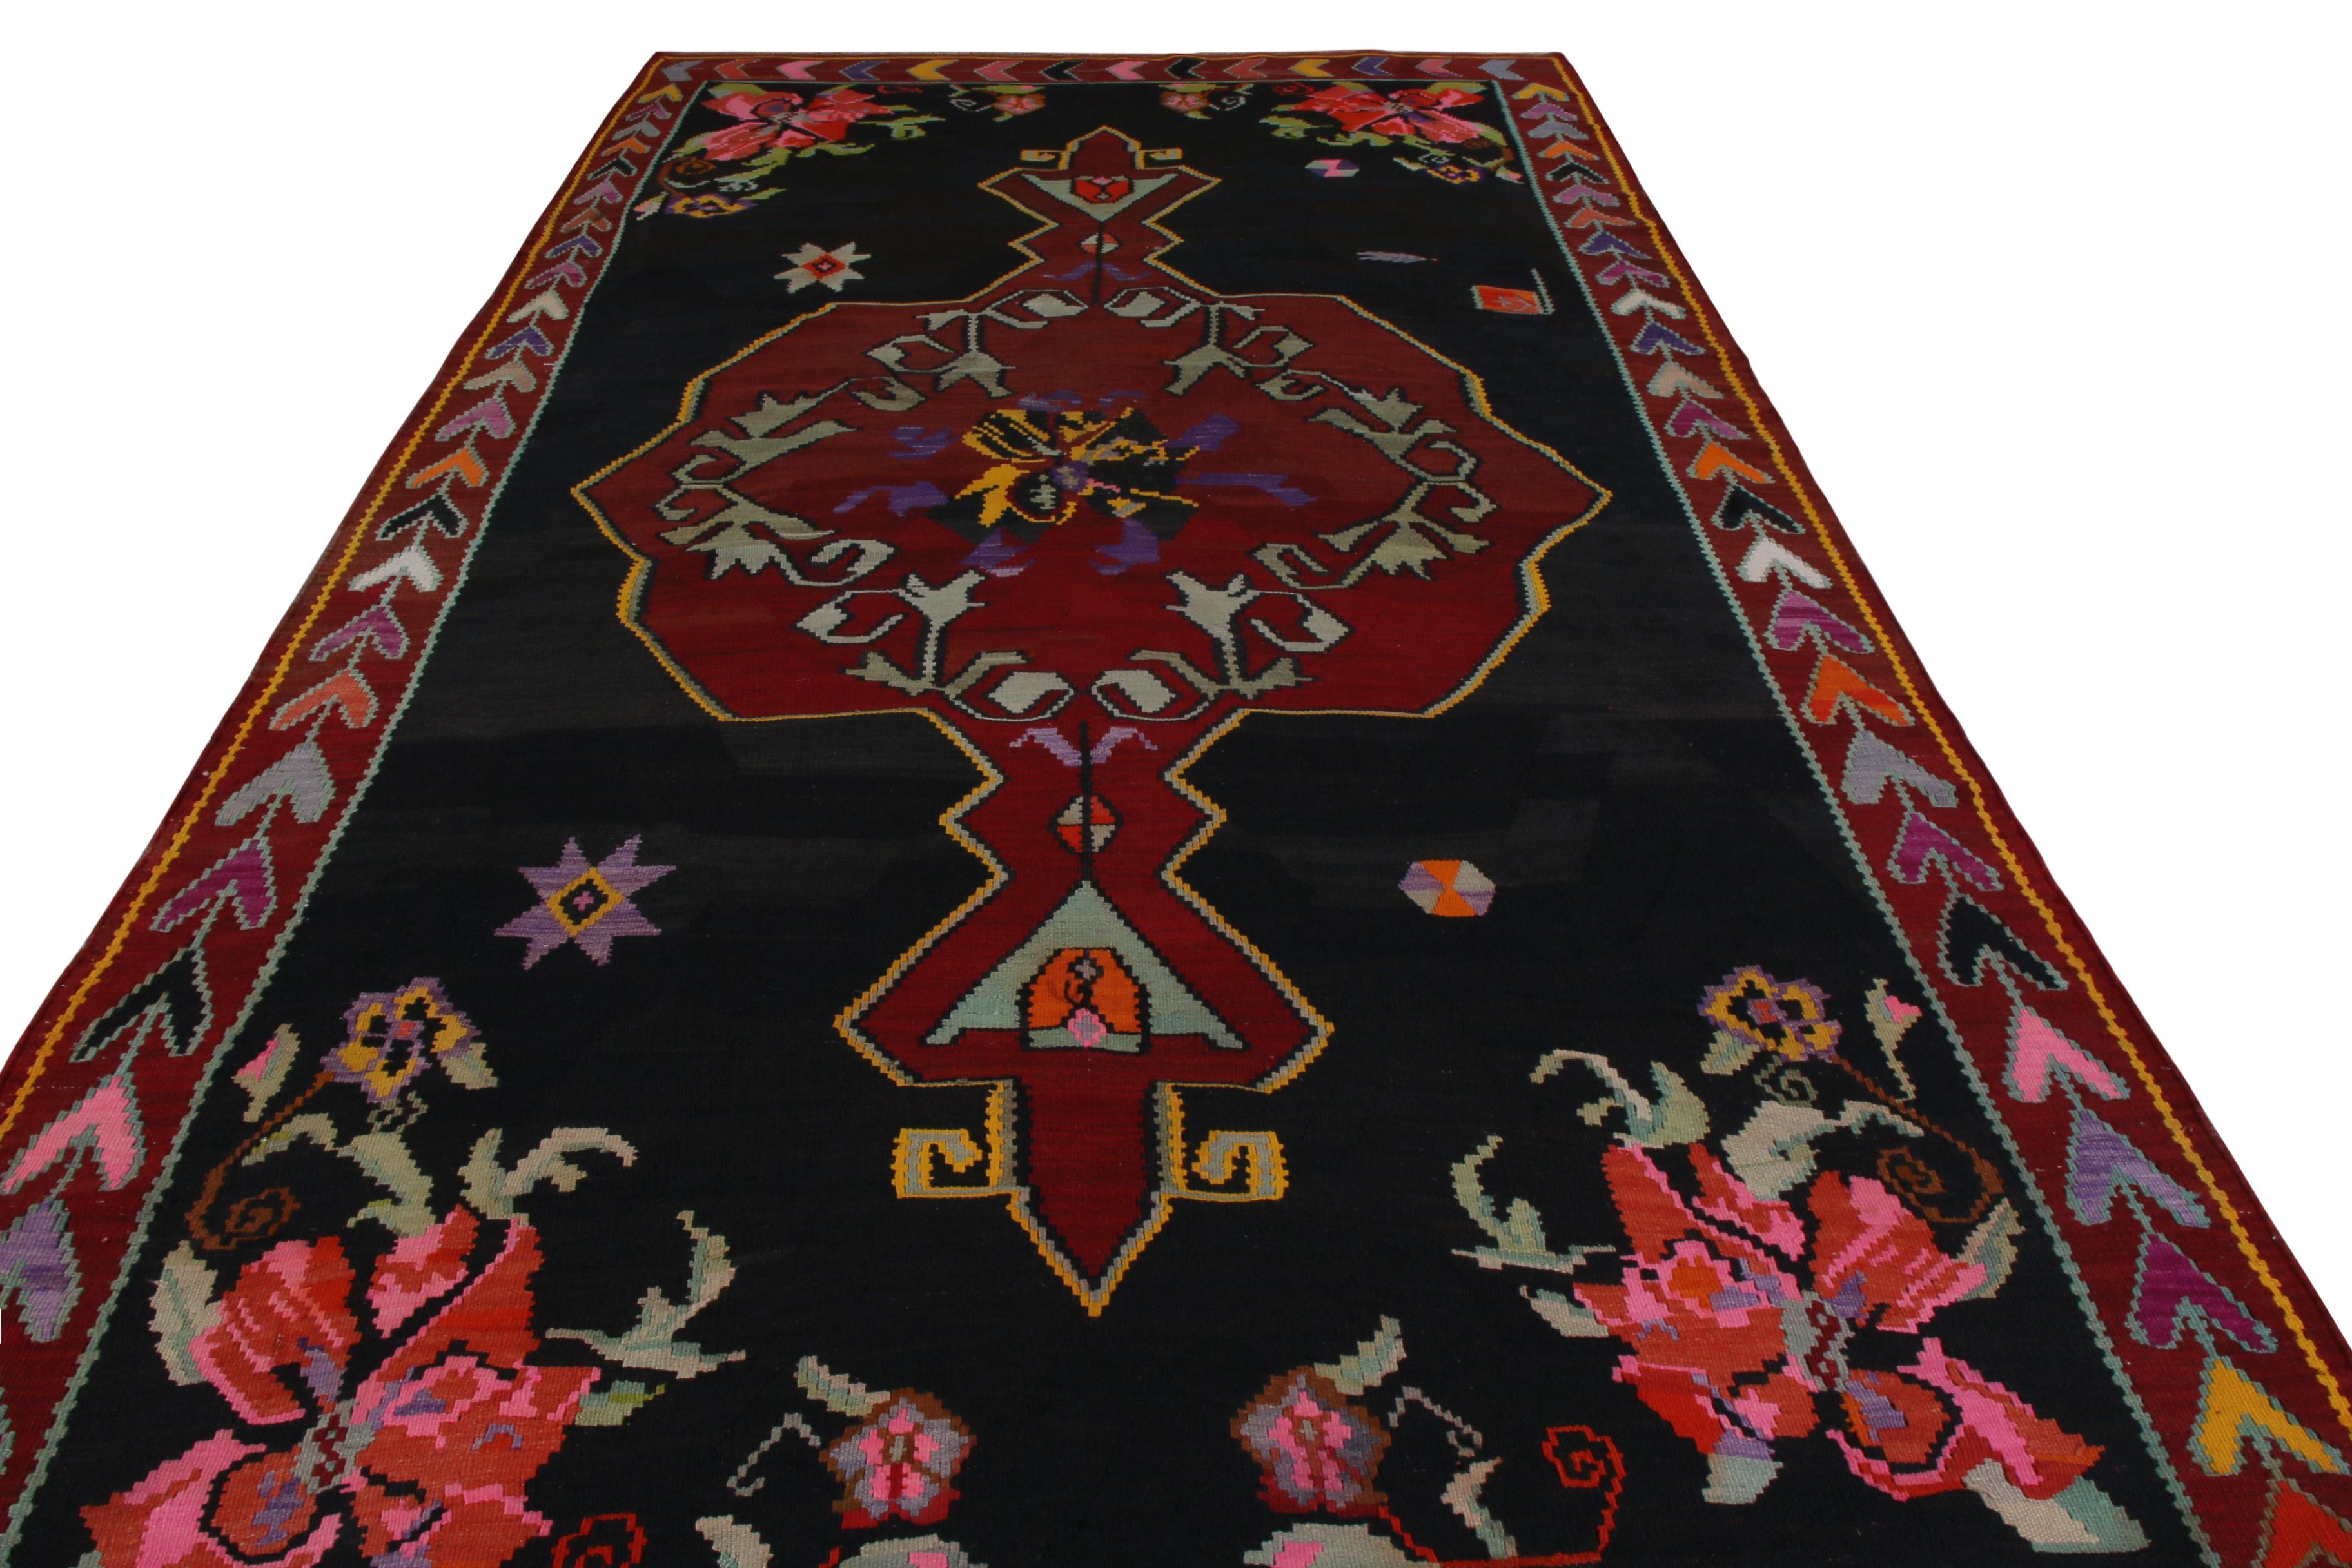 Handmade in wool circa 1950-1960, this vintage flat-weave Kilim rug was created in Turkey. A midcentury Kilim, this design showcases a red medallion pattern surrounding a single flower in pink, purple, and black, with green vines circling the bloom.